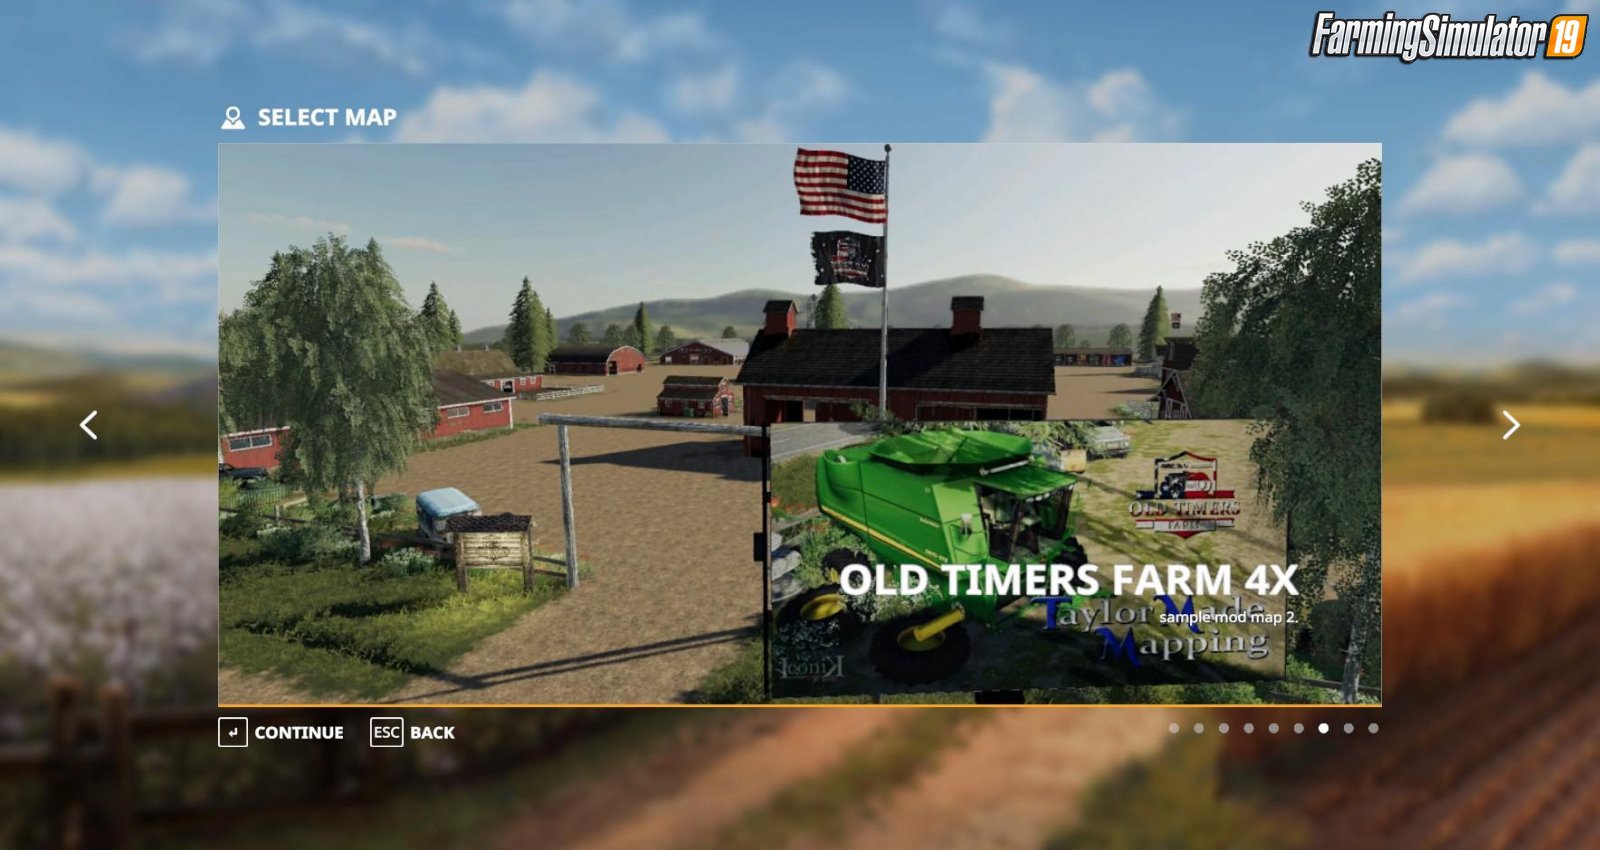 Old Timers Farm Map v1.3 by Cazz64 for FS19